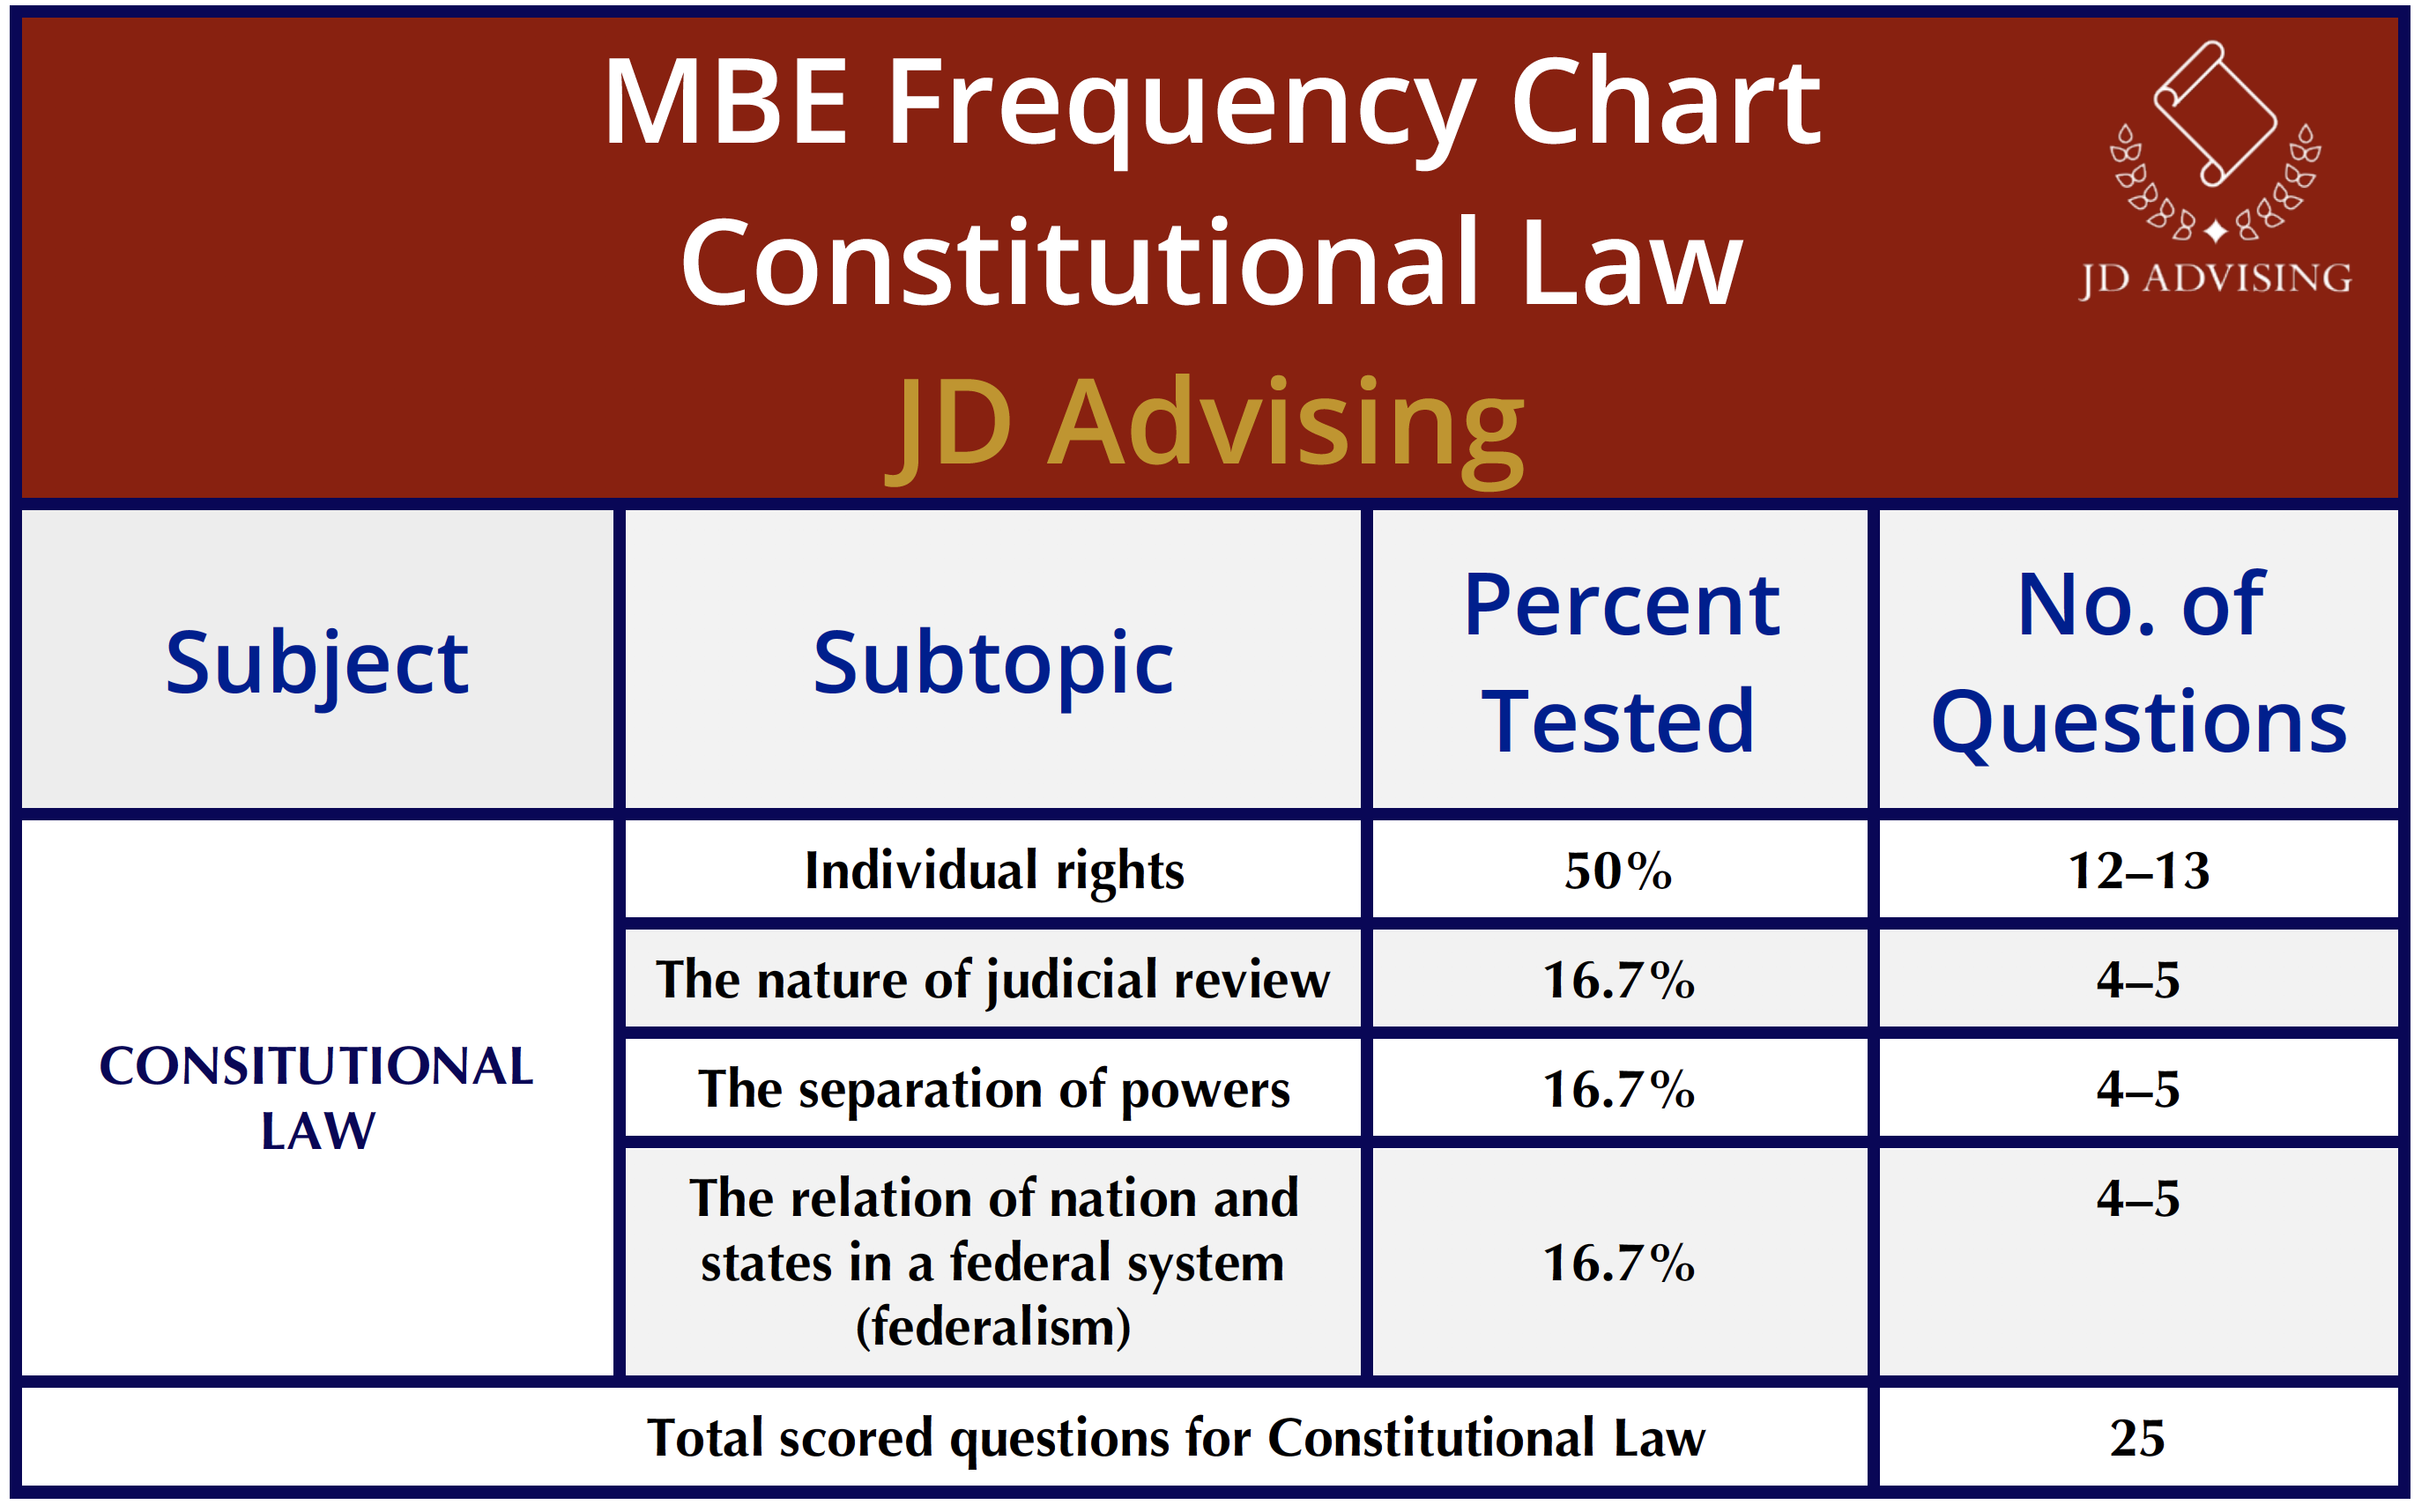 Constitutional Law MBE frequency chart